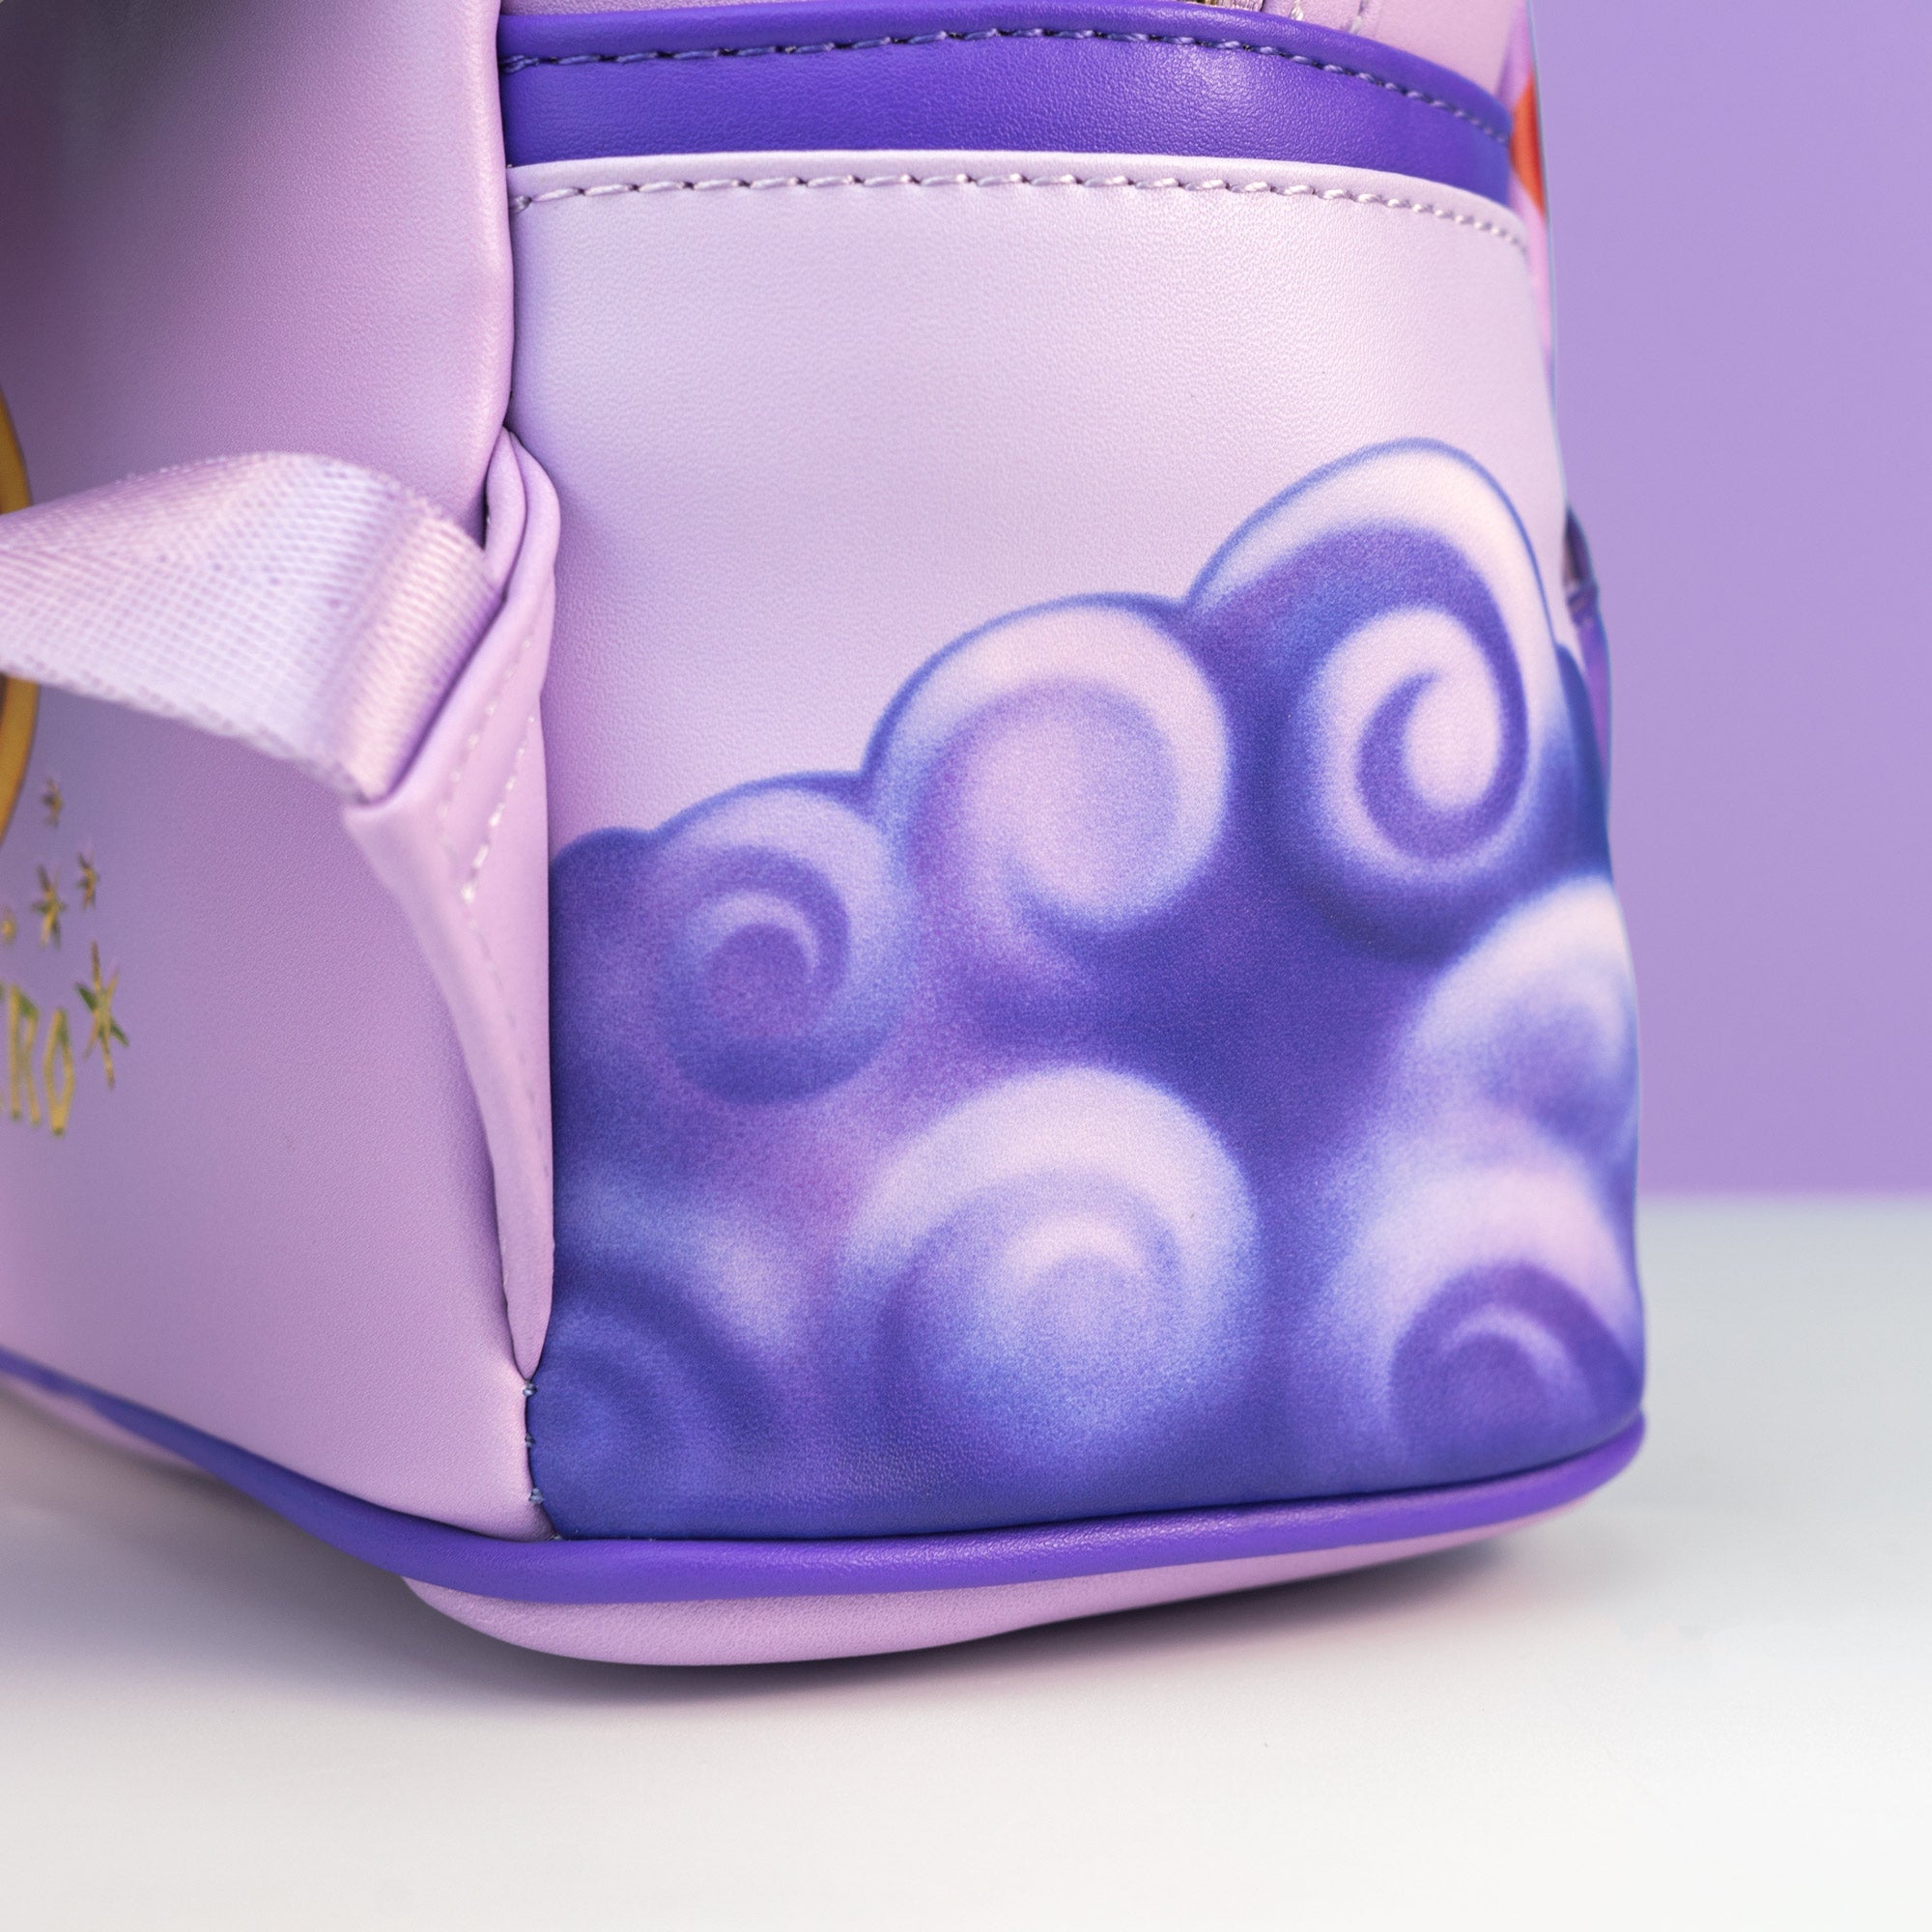 Loungefly x Disney Hercules Muses Clouds Mini Backpack - GeekCore